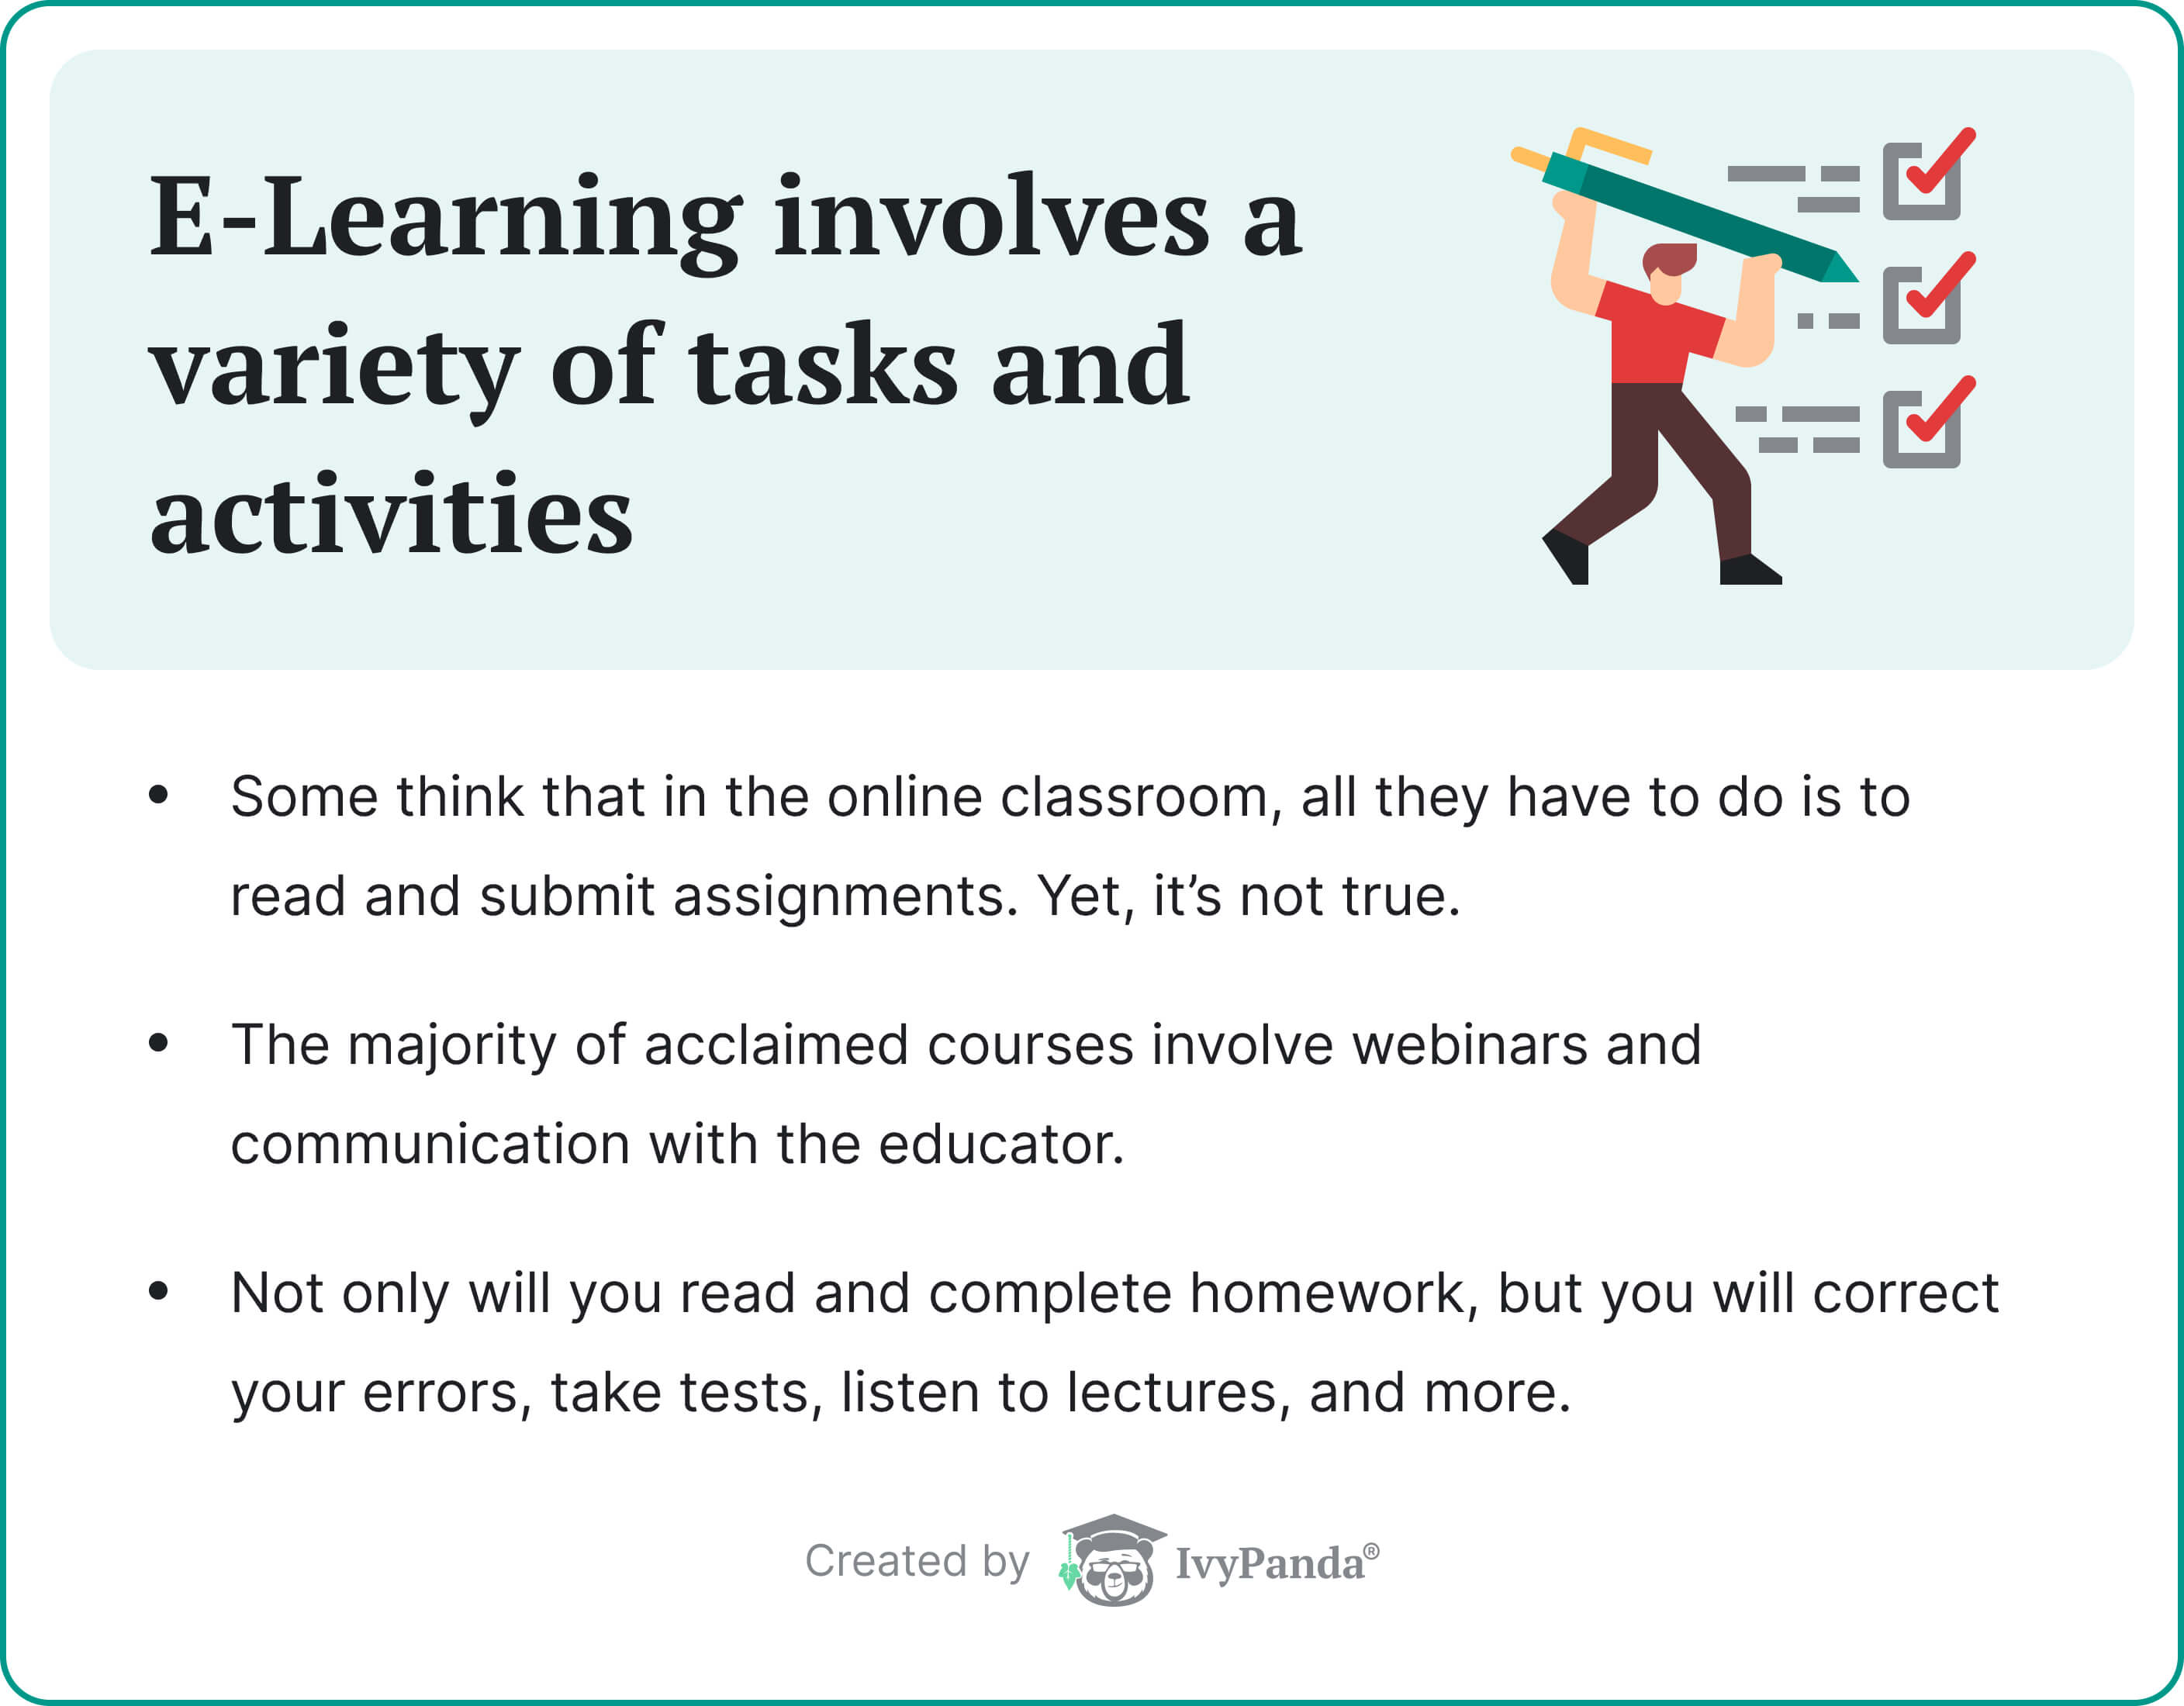 E-learning involves a variety of activities.